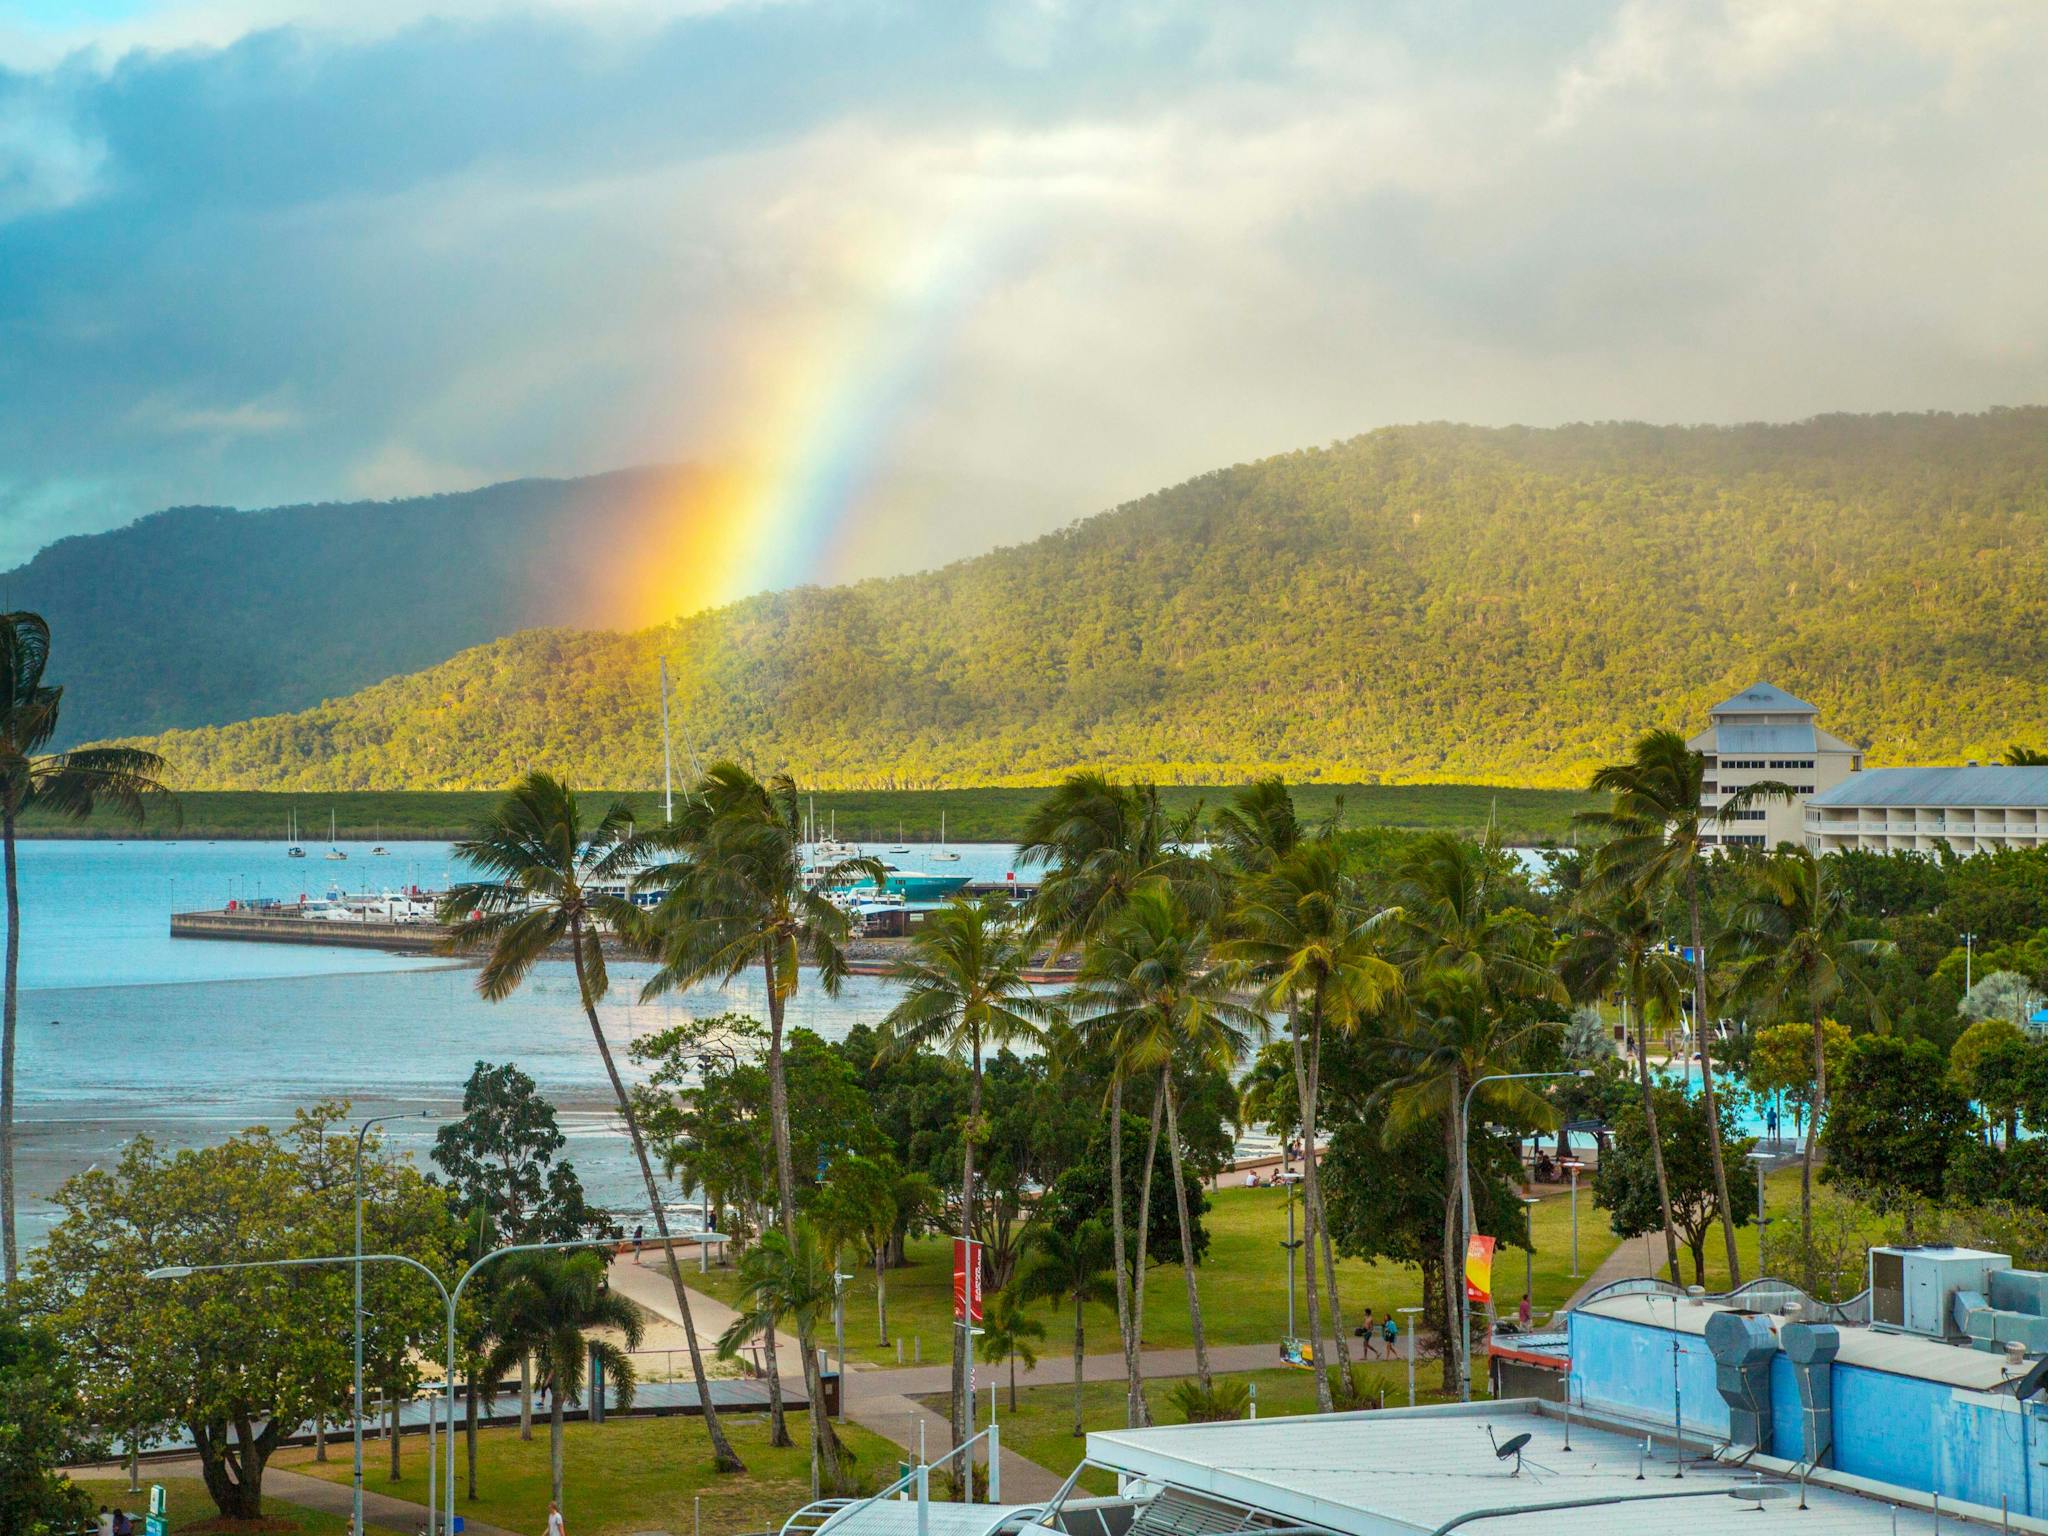 Scenic view of Cairns with Rainbow